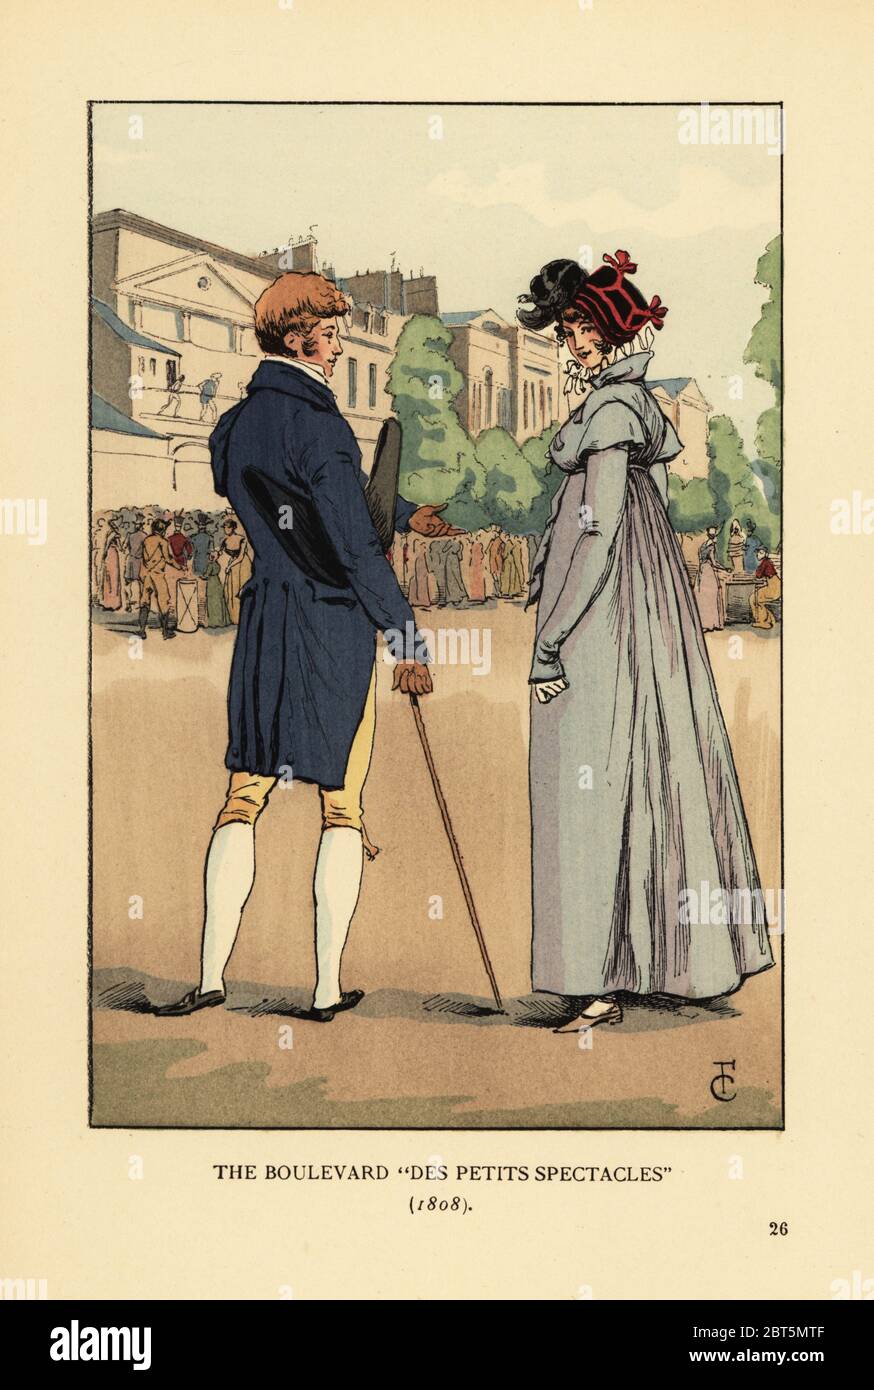 Fashionable couple slumming it on the Boulevard du Temple, Paris. The Boulevard des Petits Spectacles, 1808. In the background, crowds mill around in front of the many small theatres on the street. Handcoloured lithograph by R.V. after an illustration by Francois Courboin from Octave Uzannes Fashion in Paris, William Heinemann, London, 1898. Stock Photo